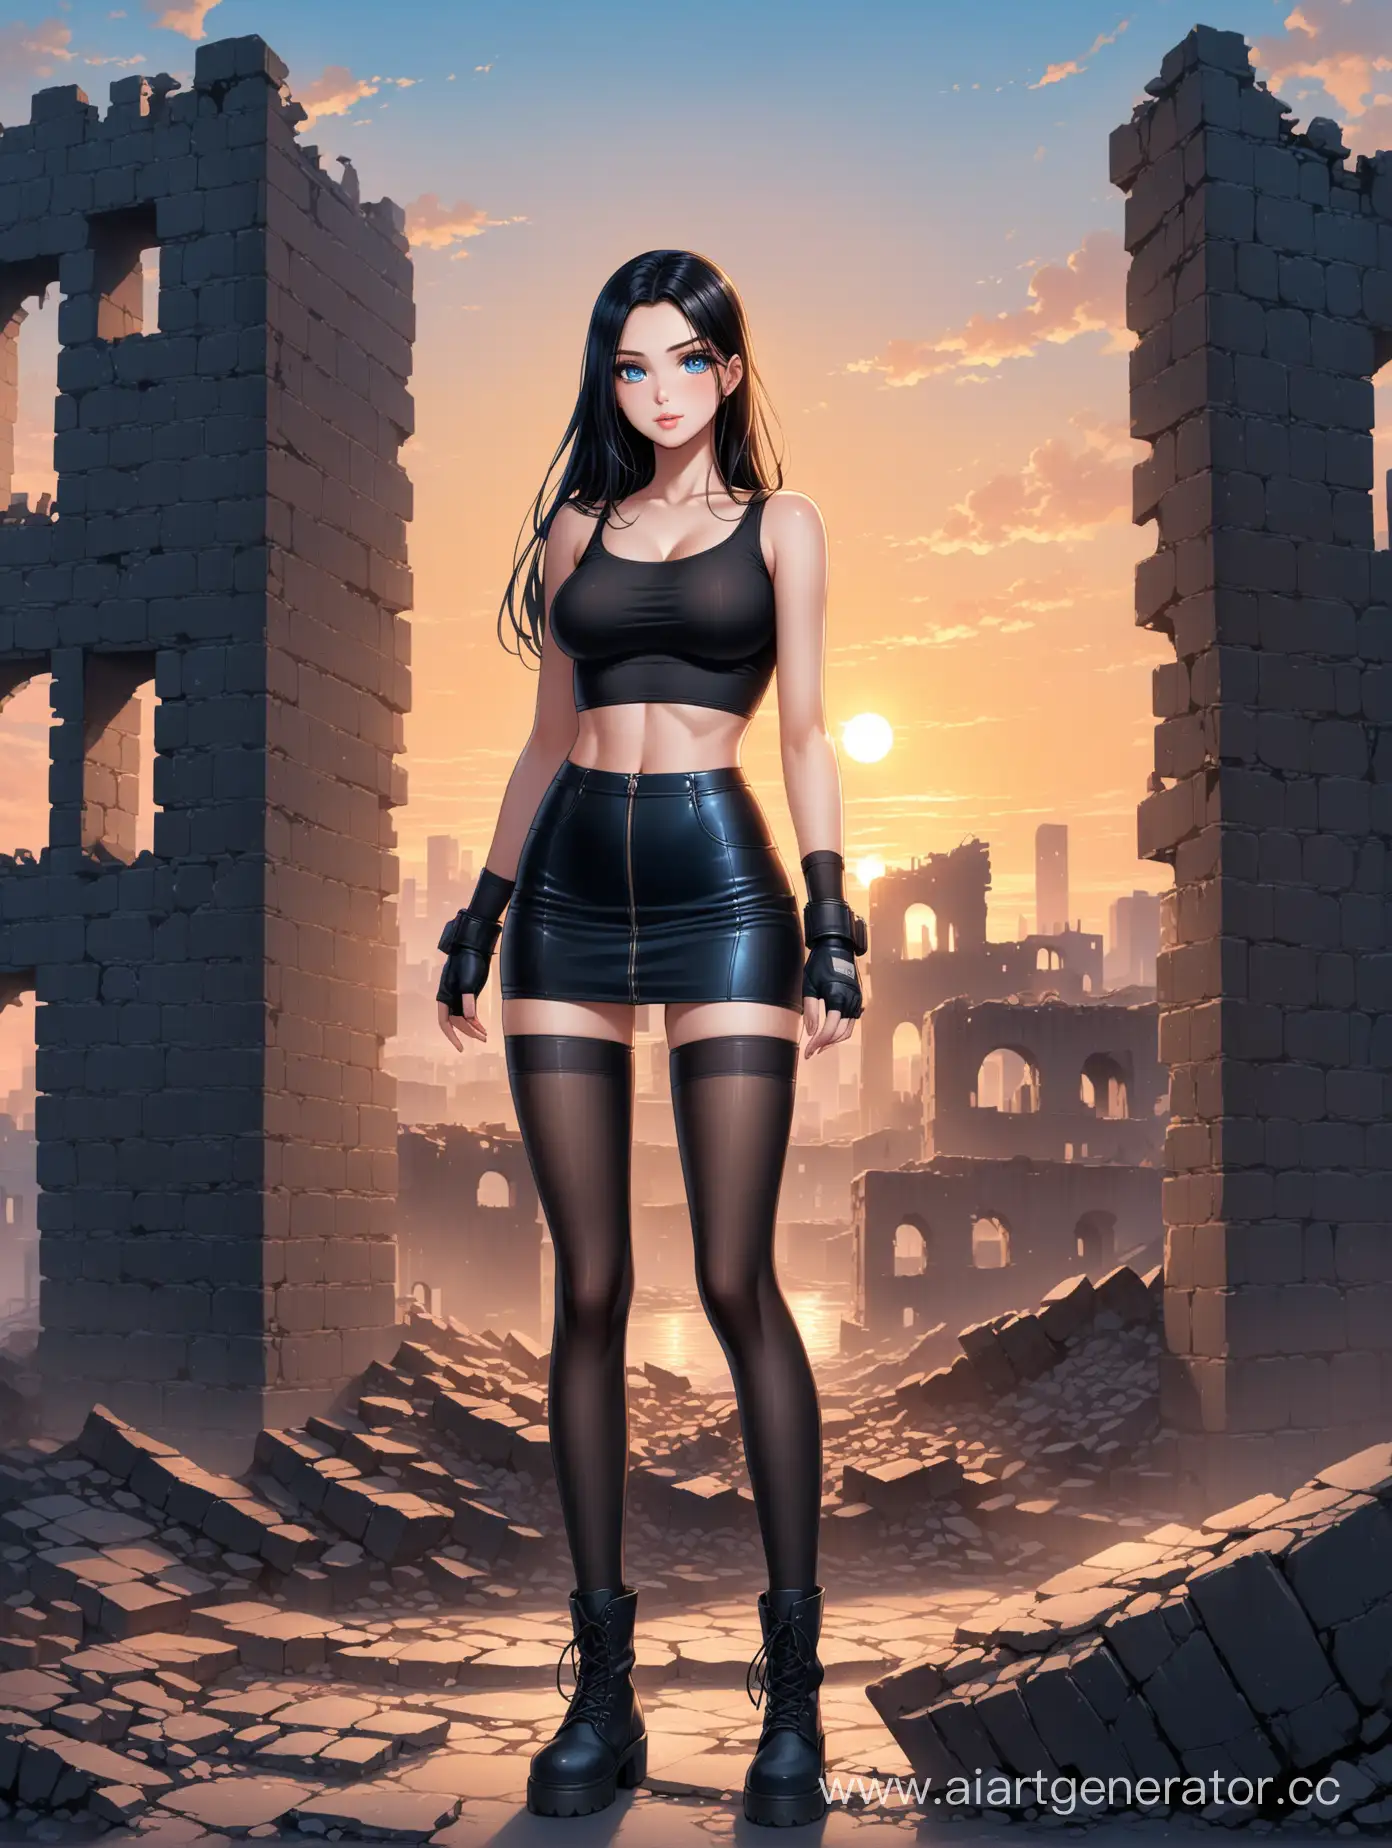 Elegant-Tall-Girl-Stands-Amid-City-Ruins-at-Sunset